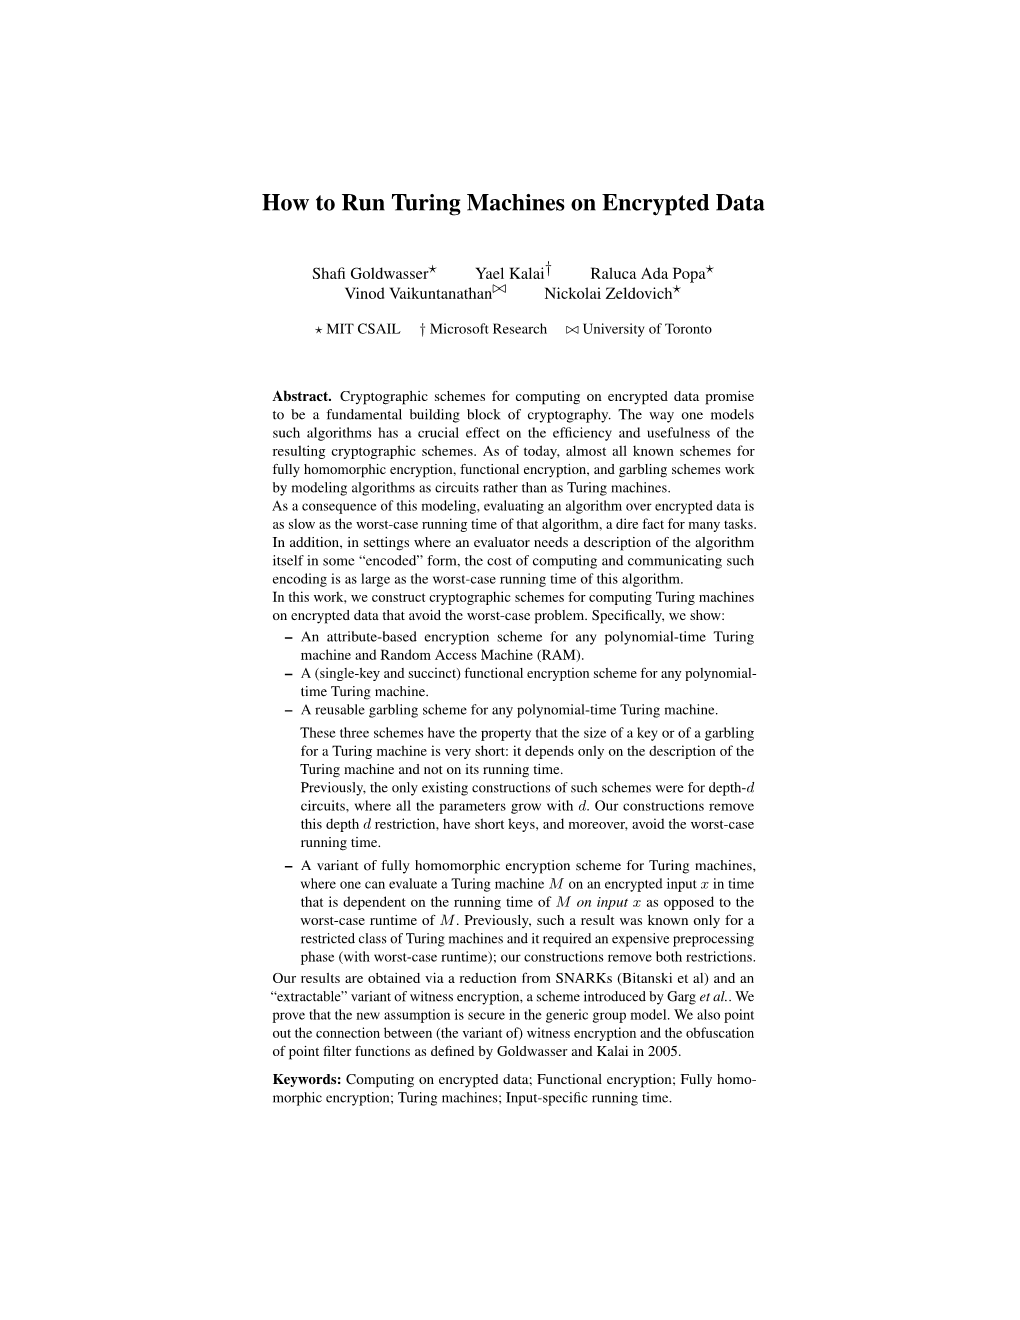 How to Run Turing Machines on Encrypted Data